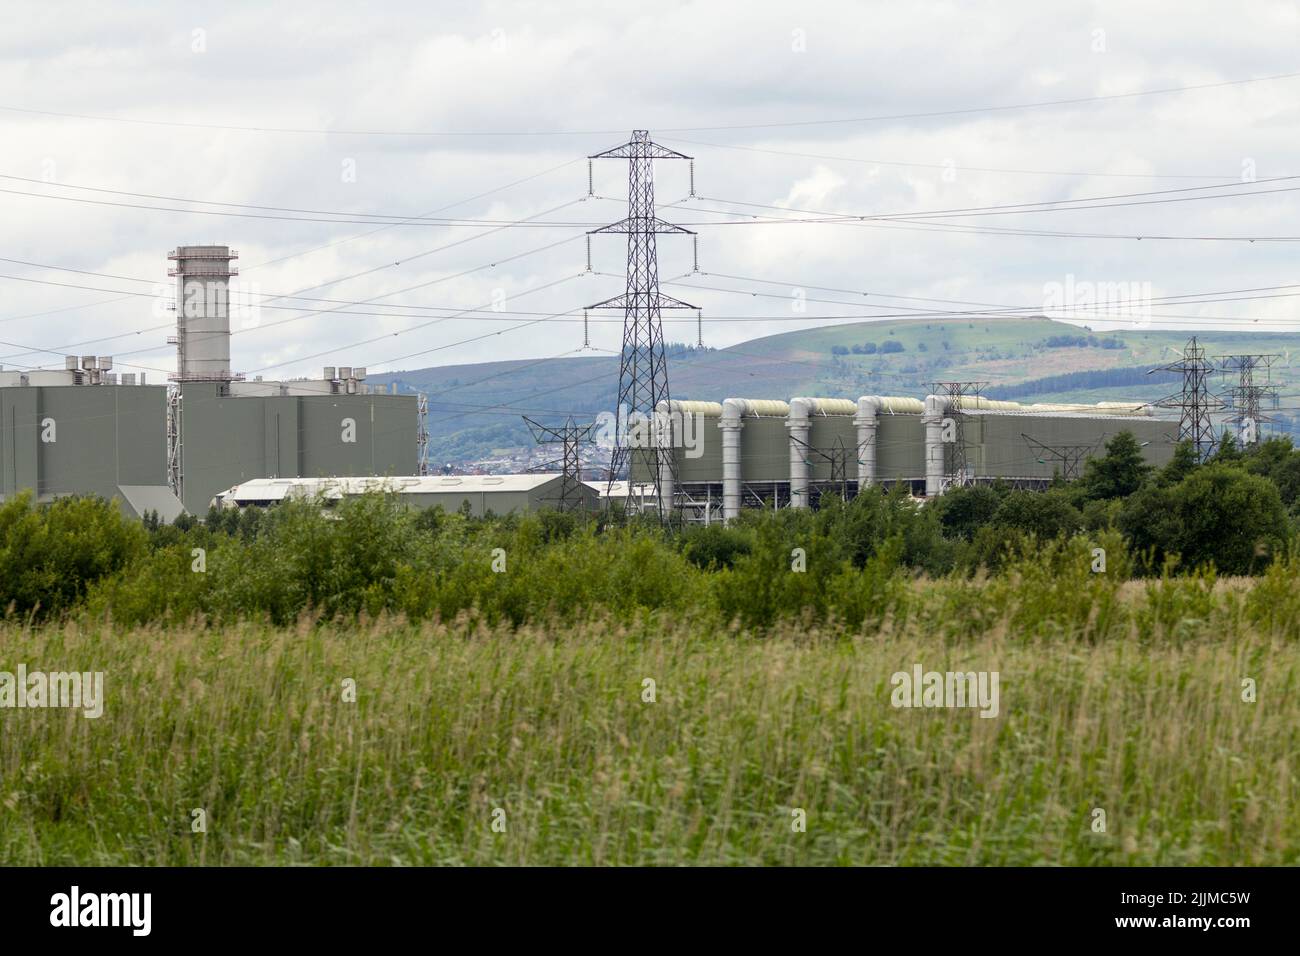 Industrial landscape in part of rspb newport south wales nature reserve, mixing river usk severn estuary wetland etc with commercial landscape views Stock Photo